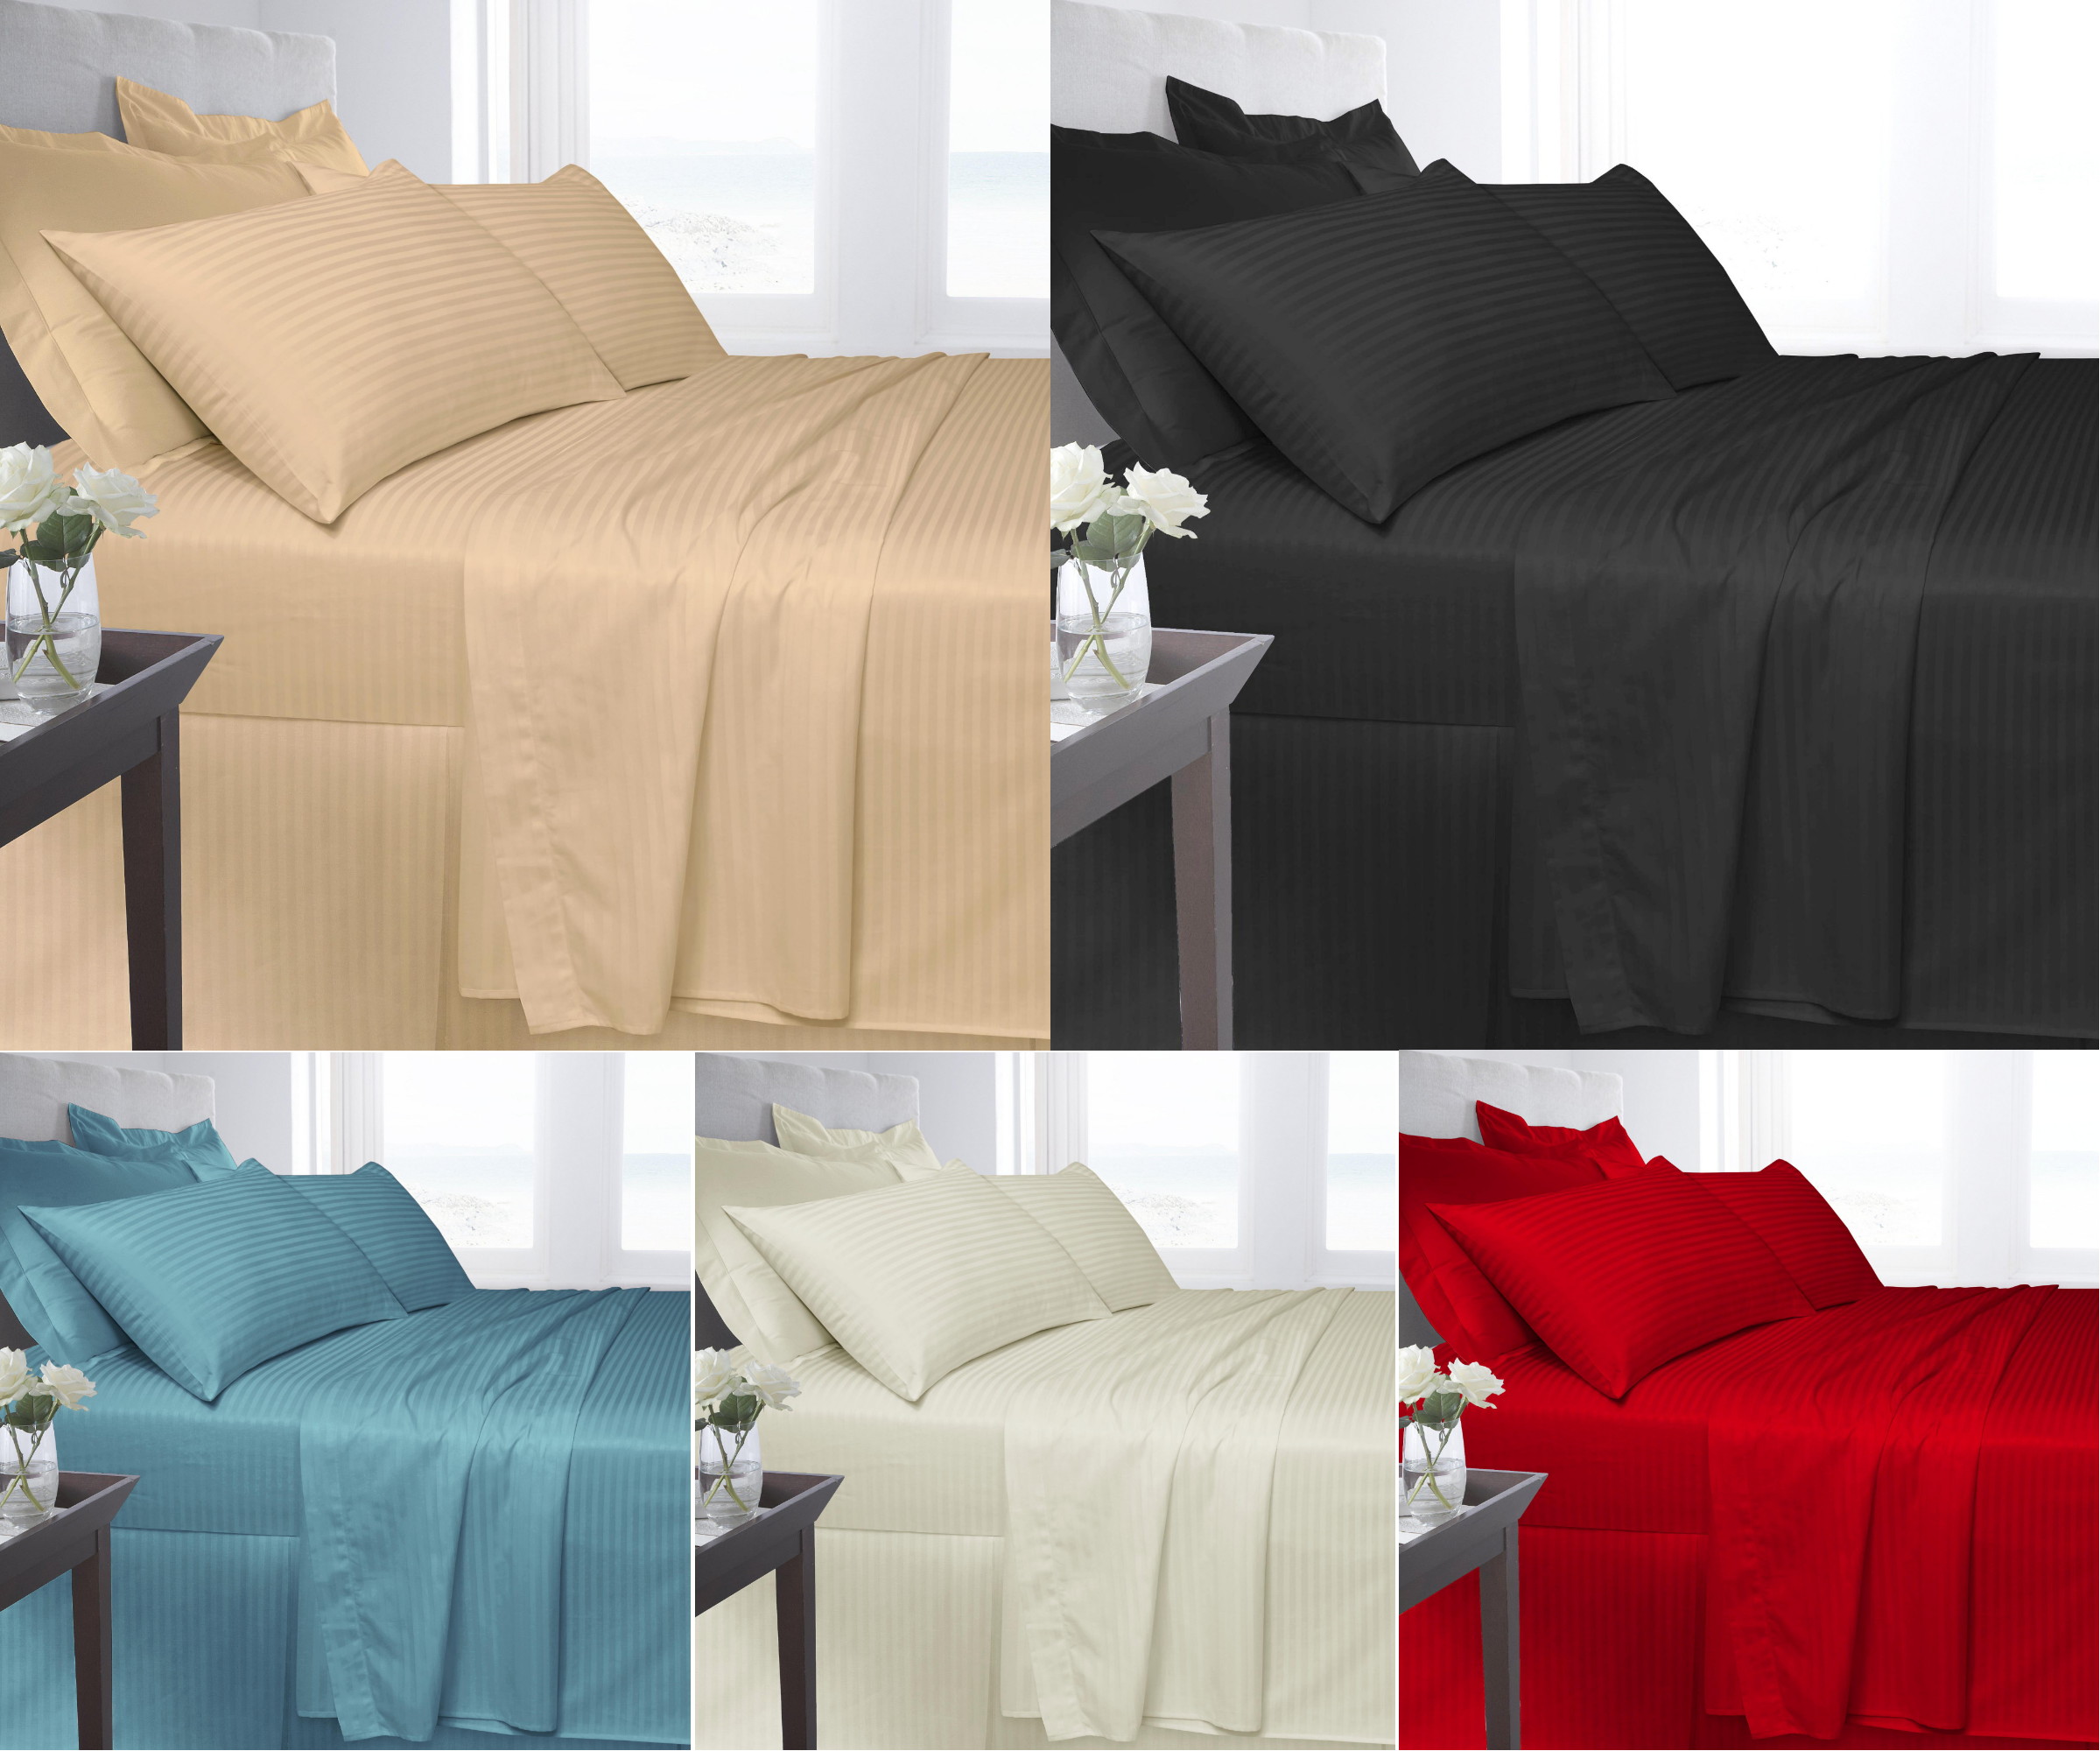 Details about   Multi Colors Egyptian Cotton 1000 TC Fitted Sheet+2 Pillow Case Striped US Queen 